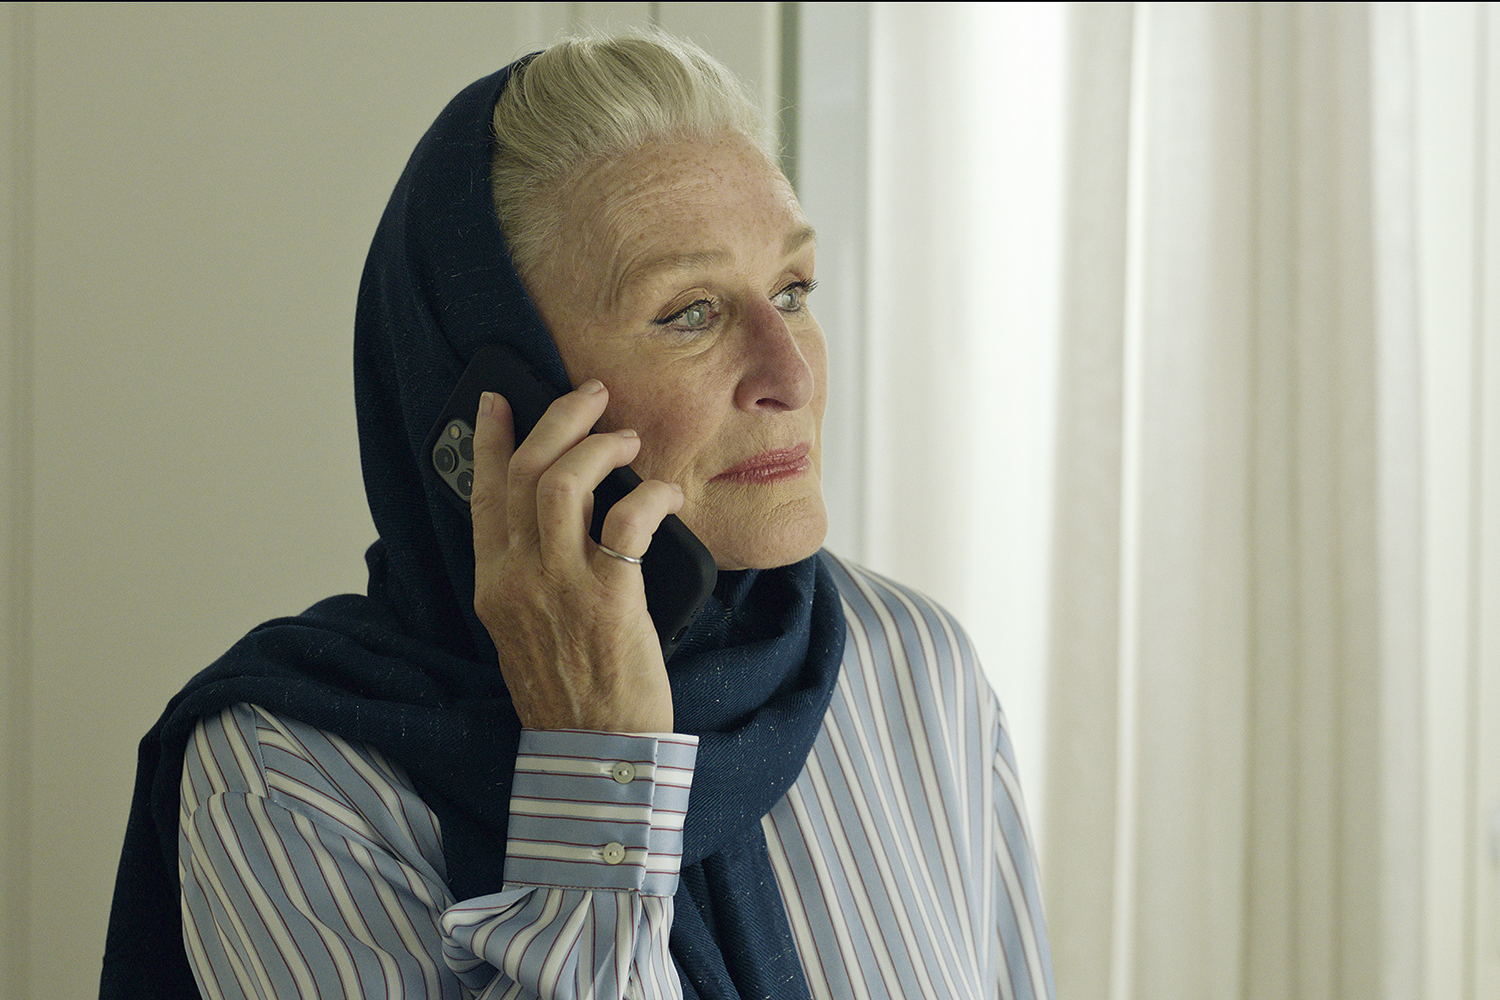 ESPIONAGE - Glenn Close in the series: Undercover agents in Iran expose historic conflict -